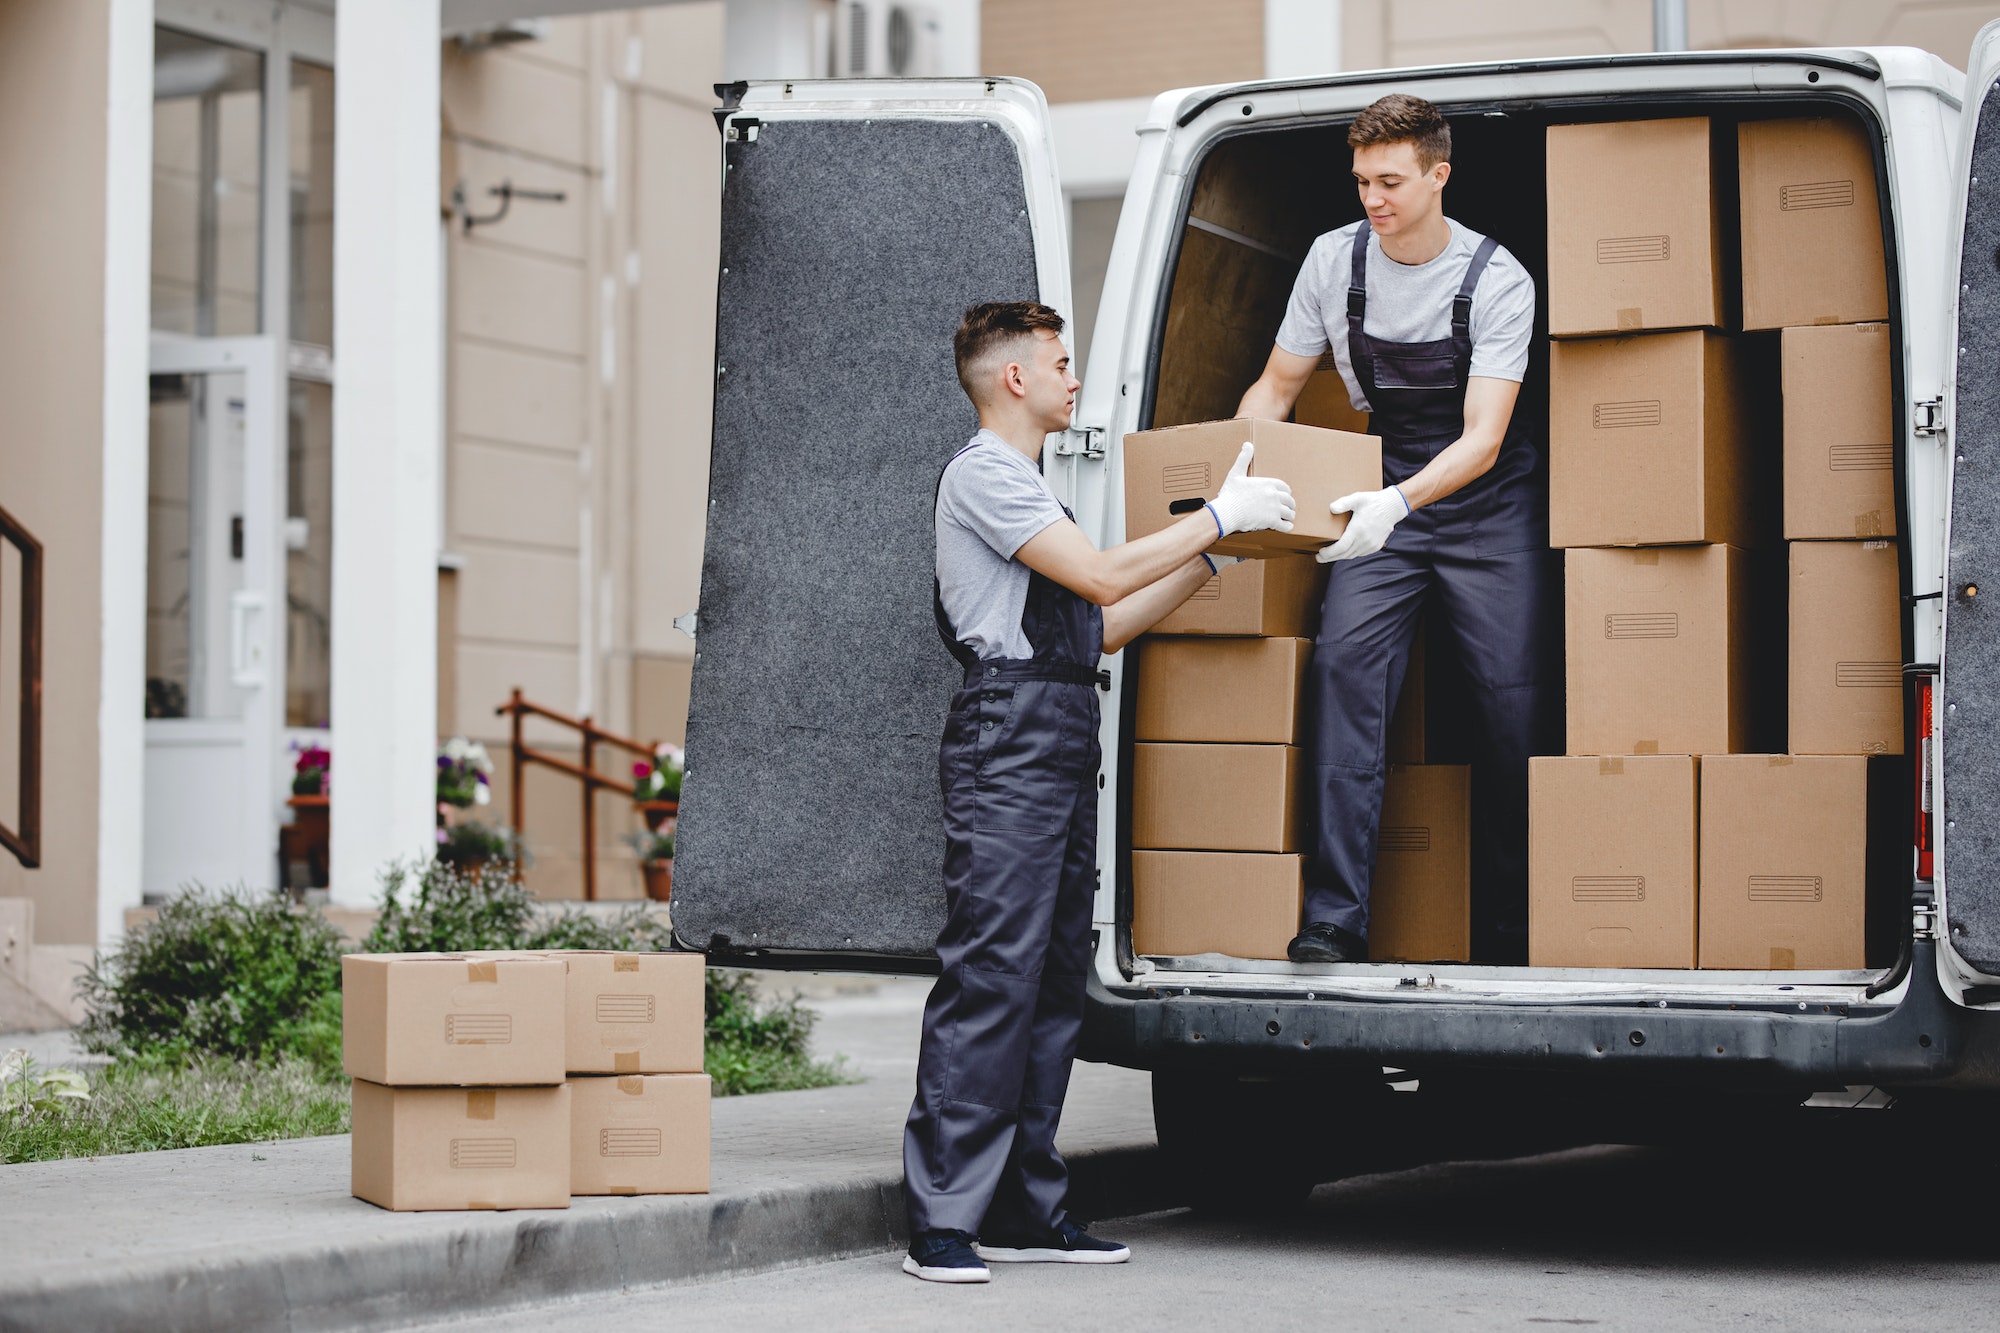 The Key to a Successful Move: Finding the Right Real Estate Lawyer and Movers